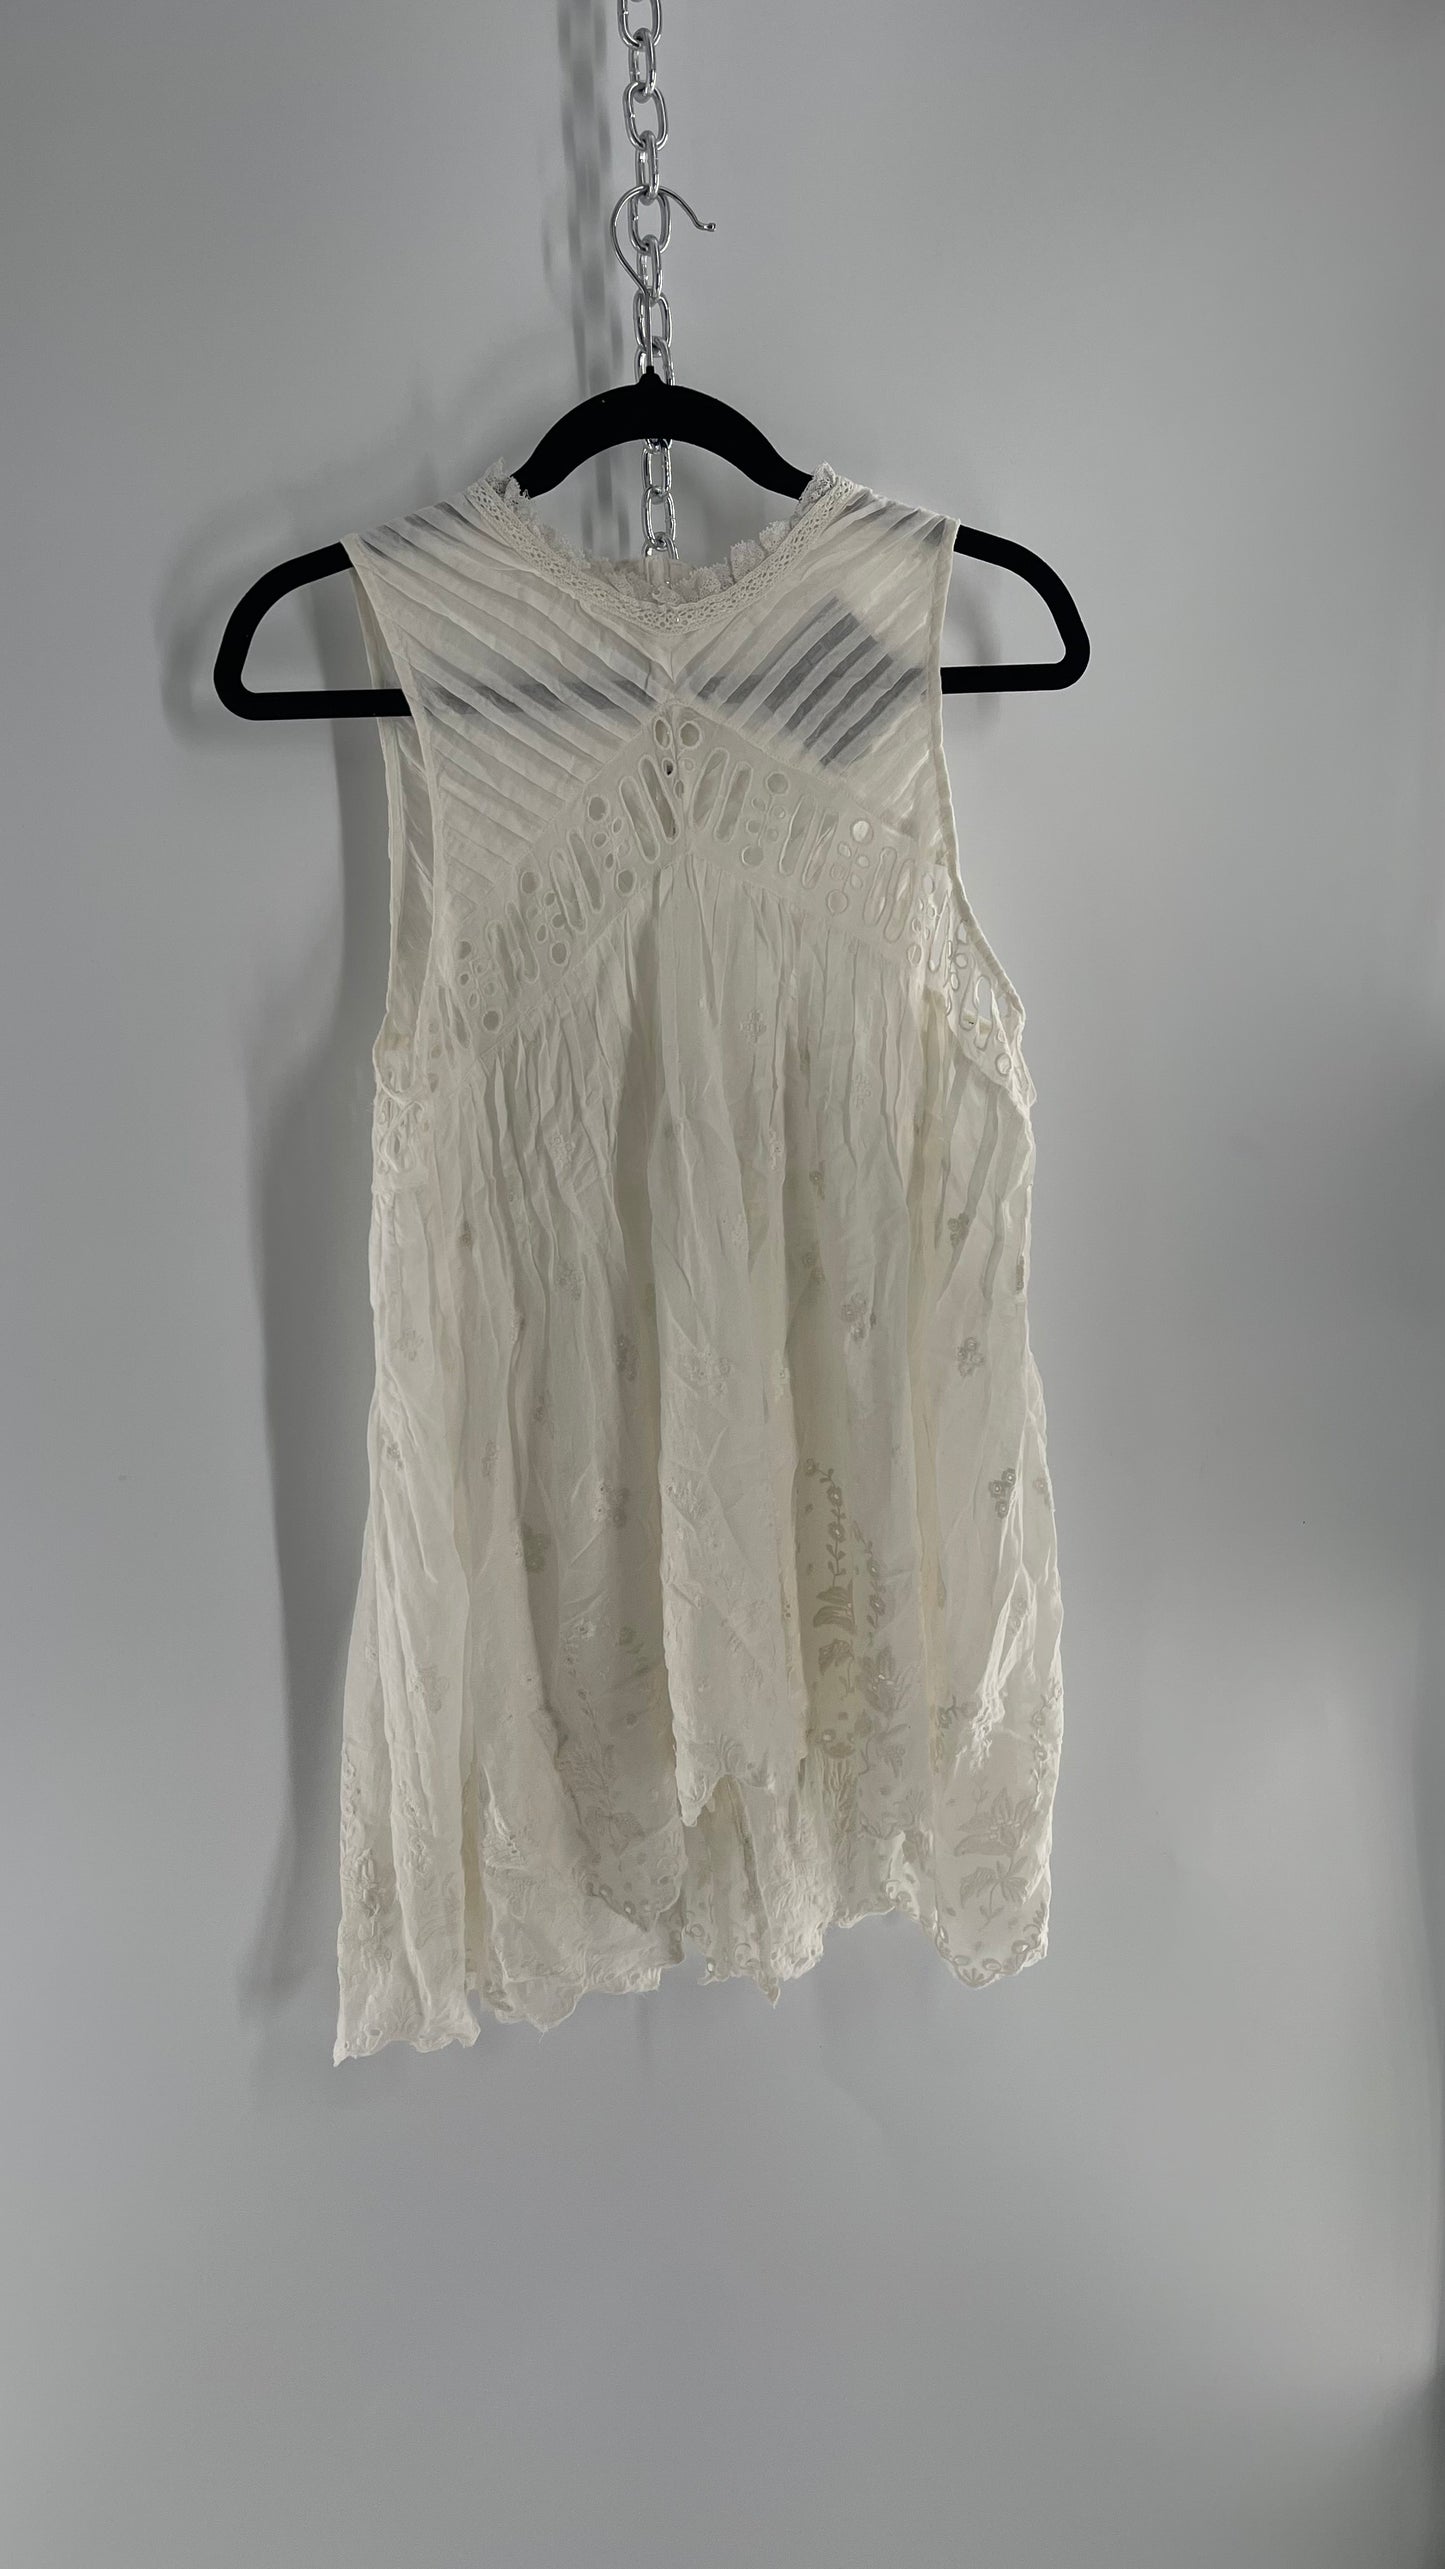 Free People White Cotton Eyelet Embroidered Lace Tank with Pleating, Buttoned and Slit Back (Small)